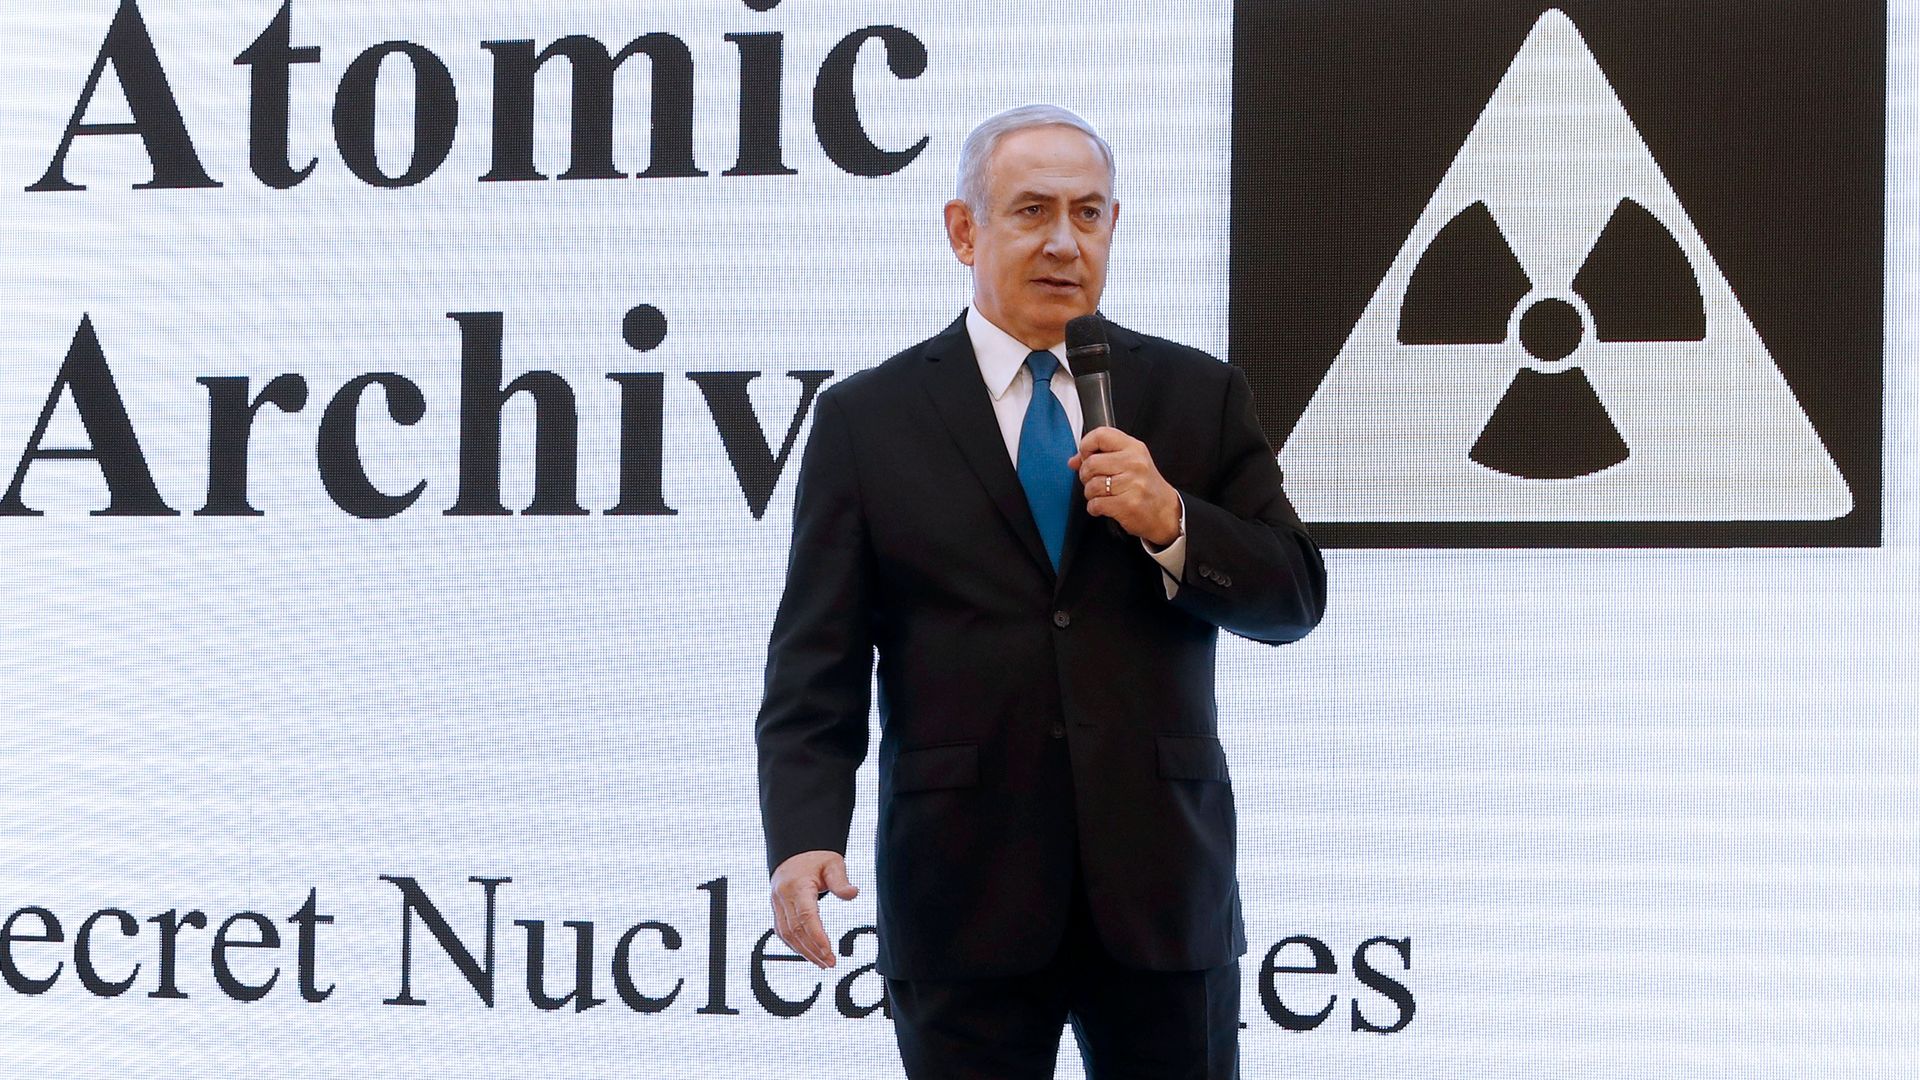 Israeli Prime Minister Benjamin Netanyahu delivers a speech on Iran's nuclear program at the defence ministry in Tel Aviv on April 30, 2018